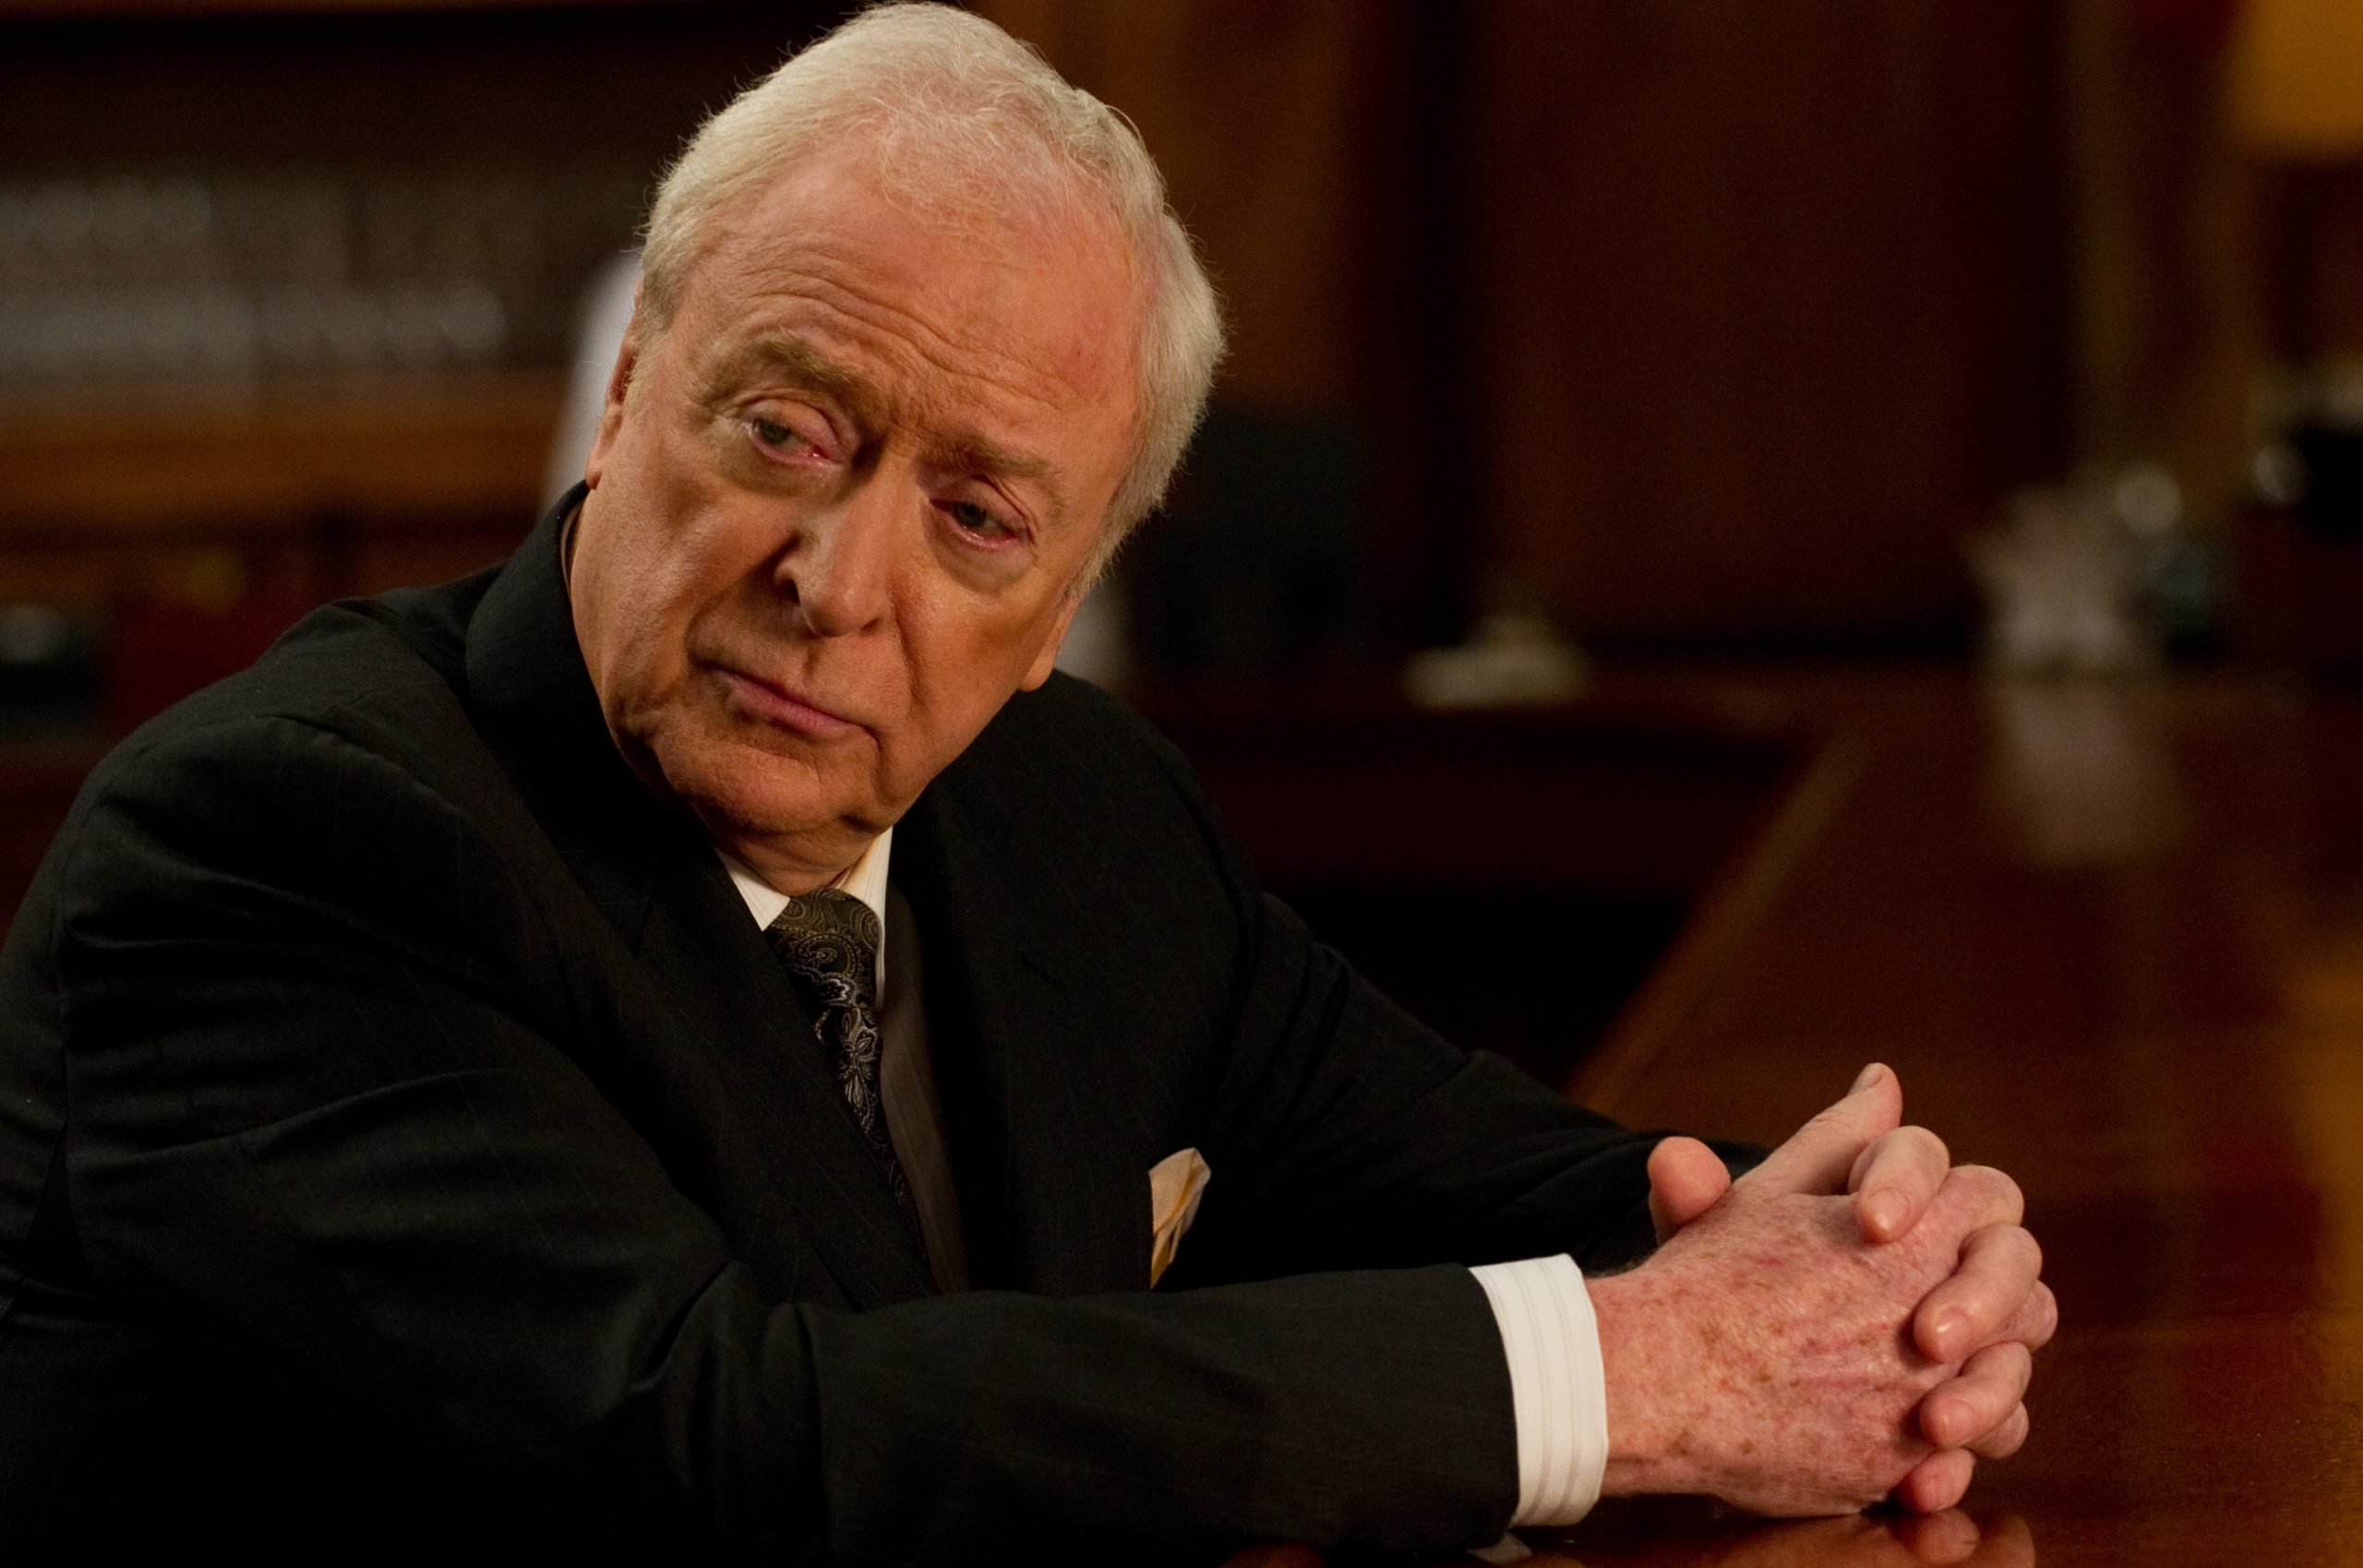 Michael Caine plays an investor in <em>Now You See Me, </em>a film about heist-pulling illusionists.